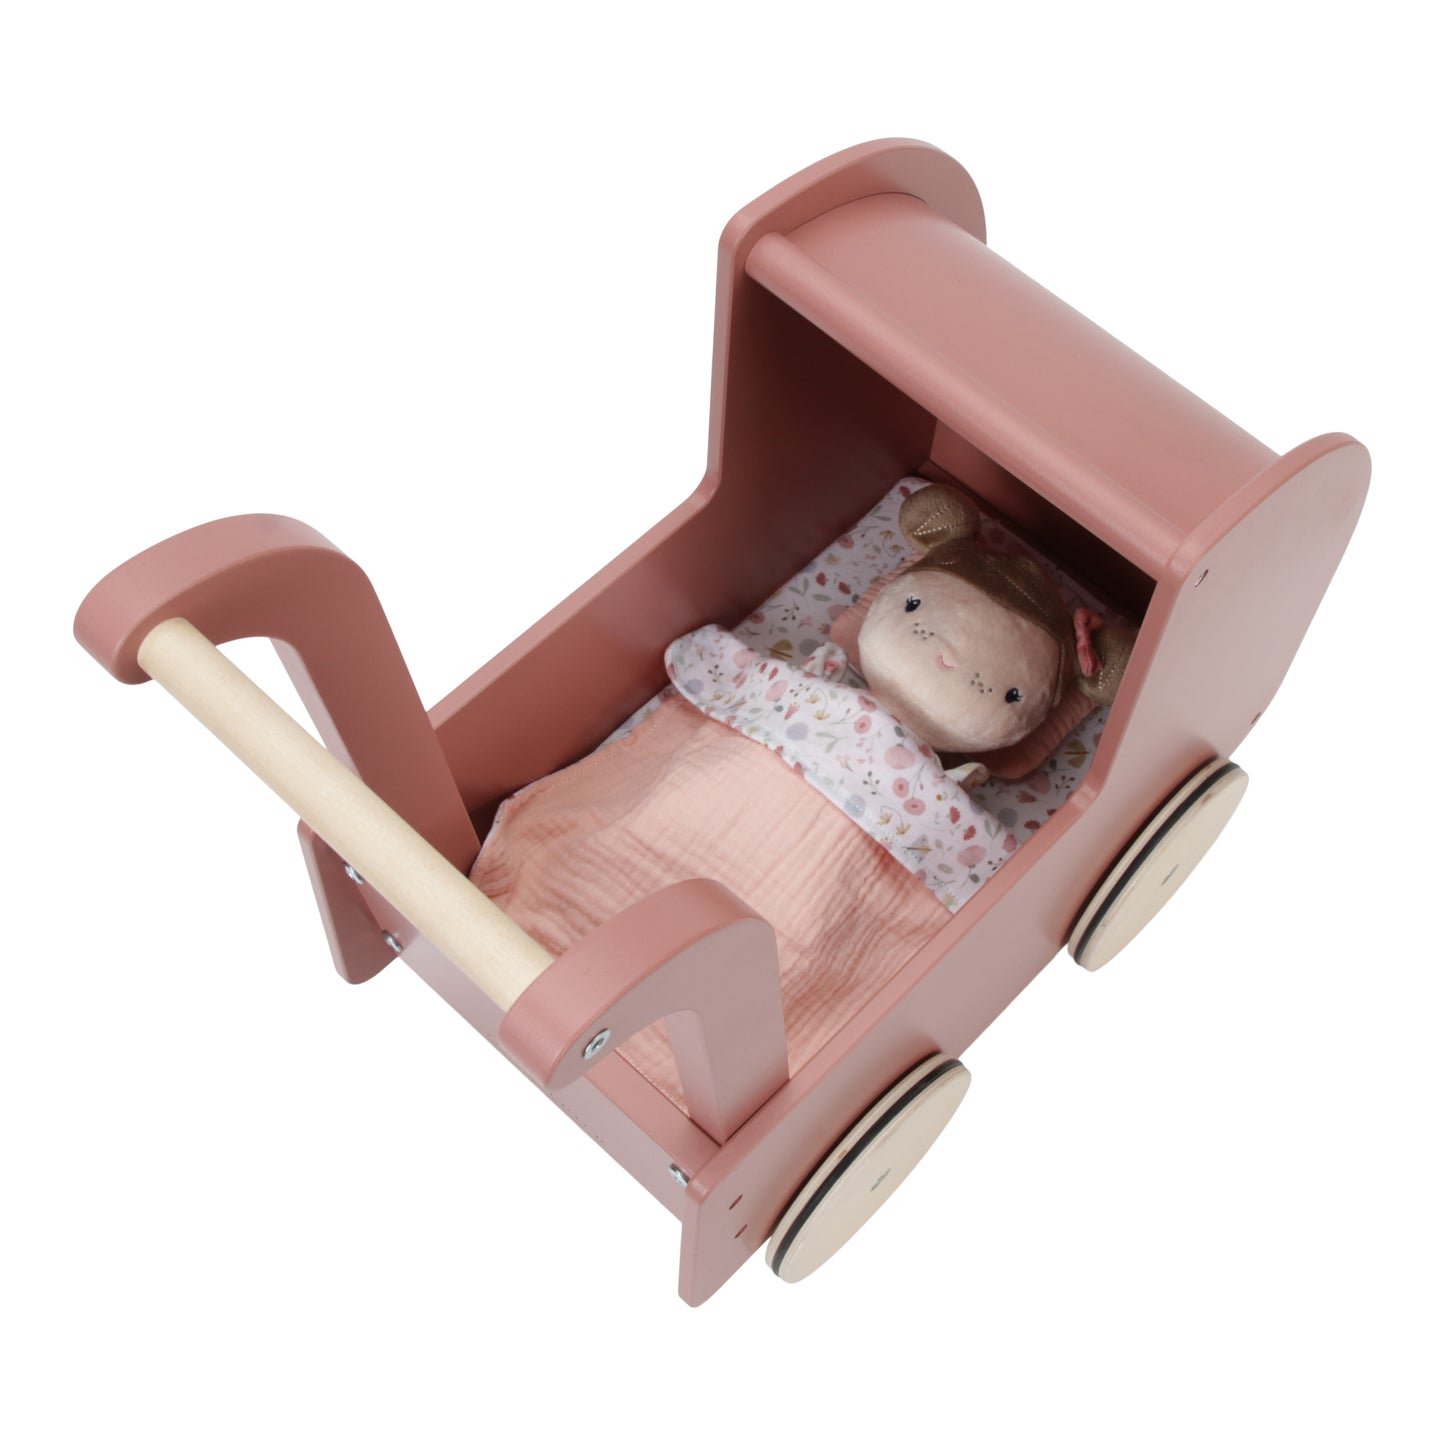 Wooden Pram With Doll and Bedding